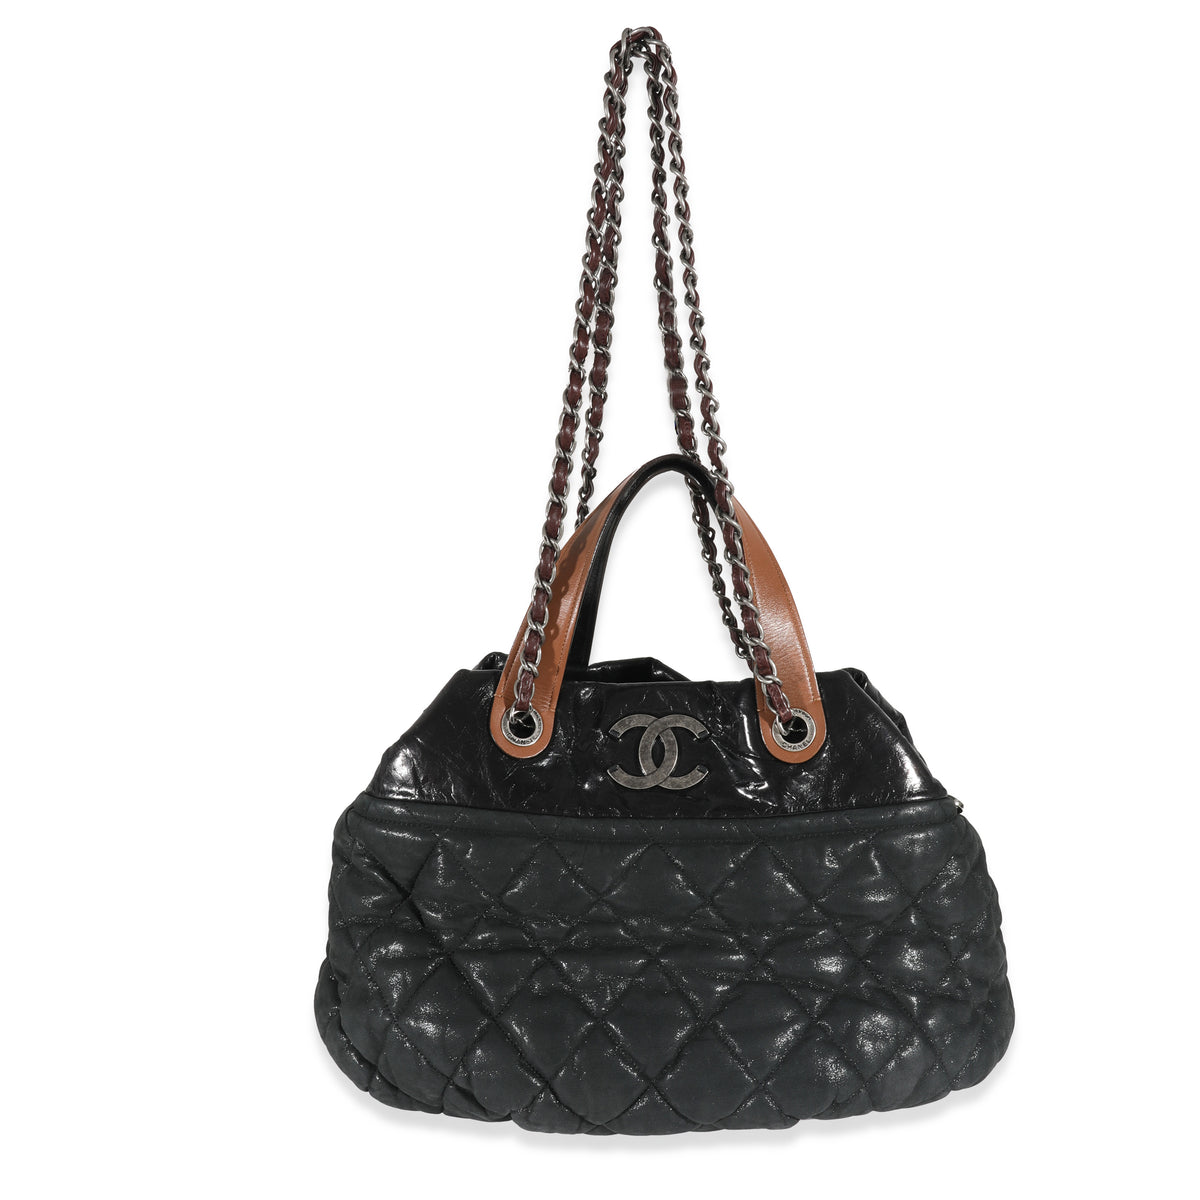 Chanel Black Iridescent Calfskin Quilted In The Mix Tote, myGemma